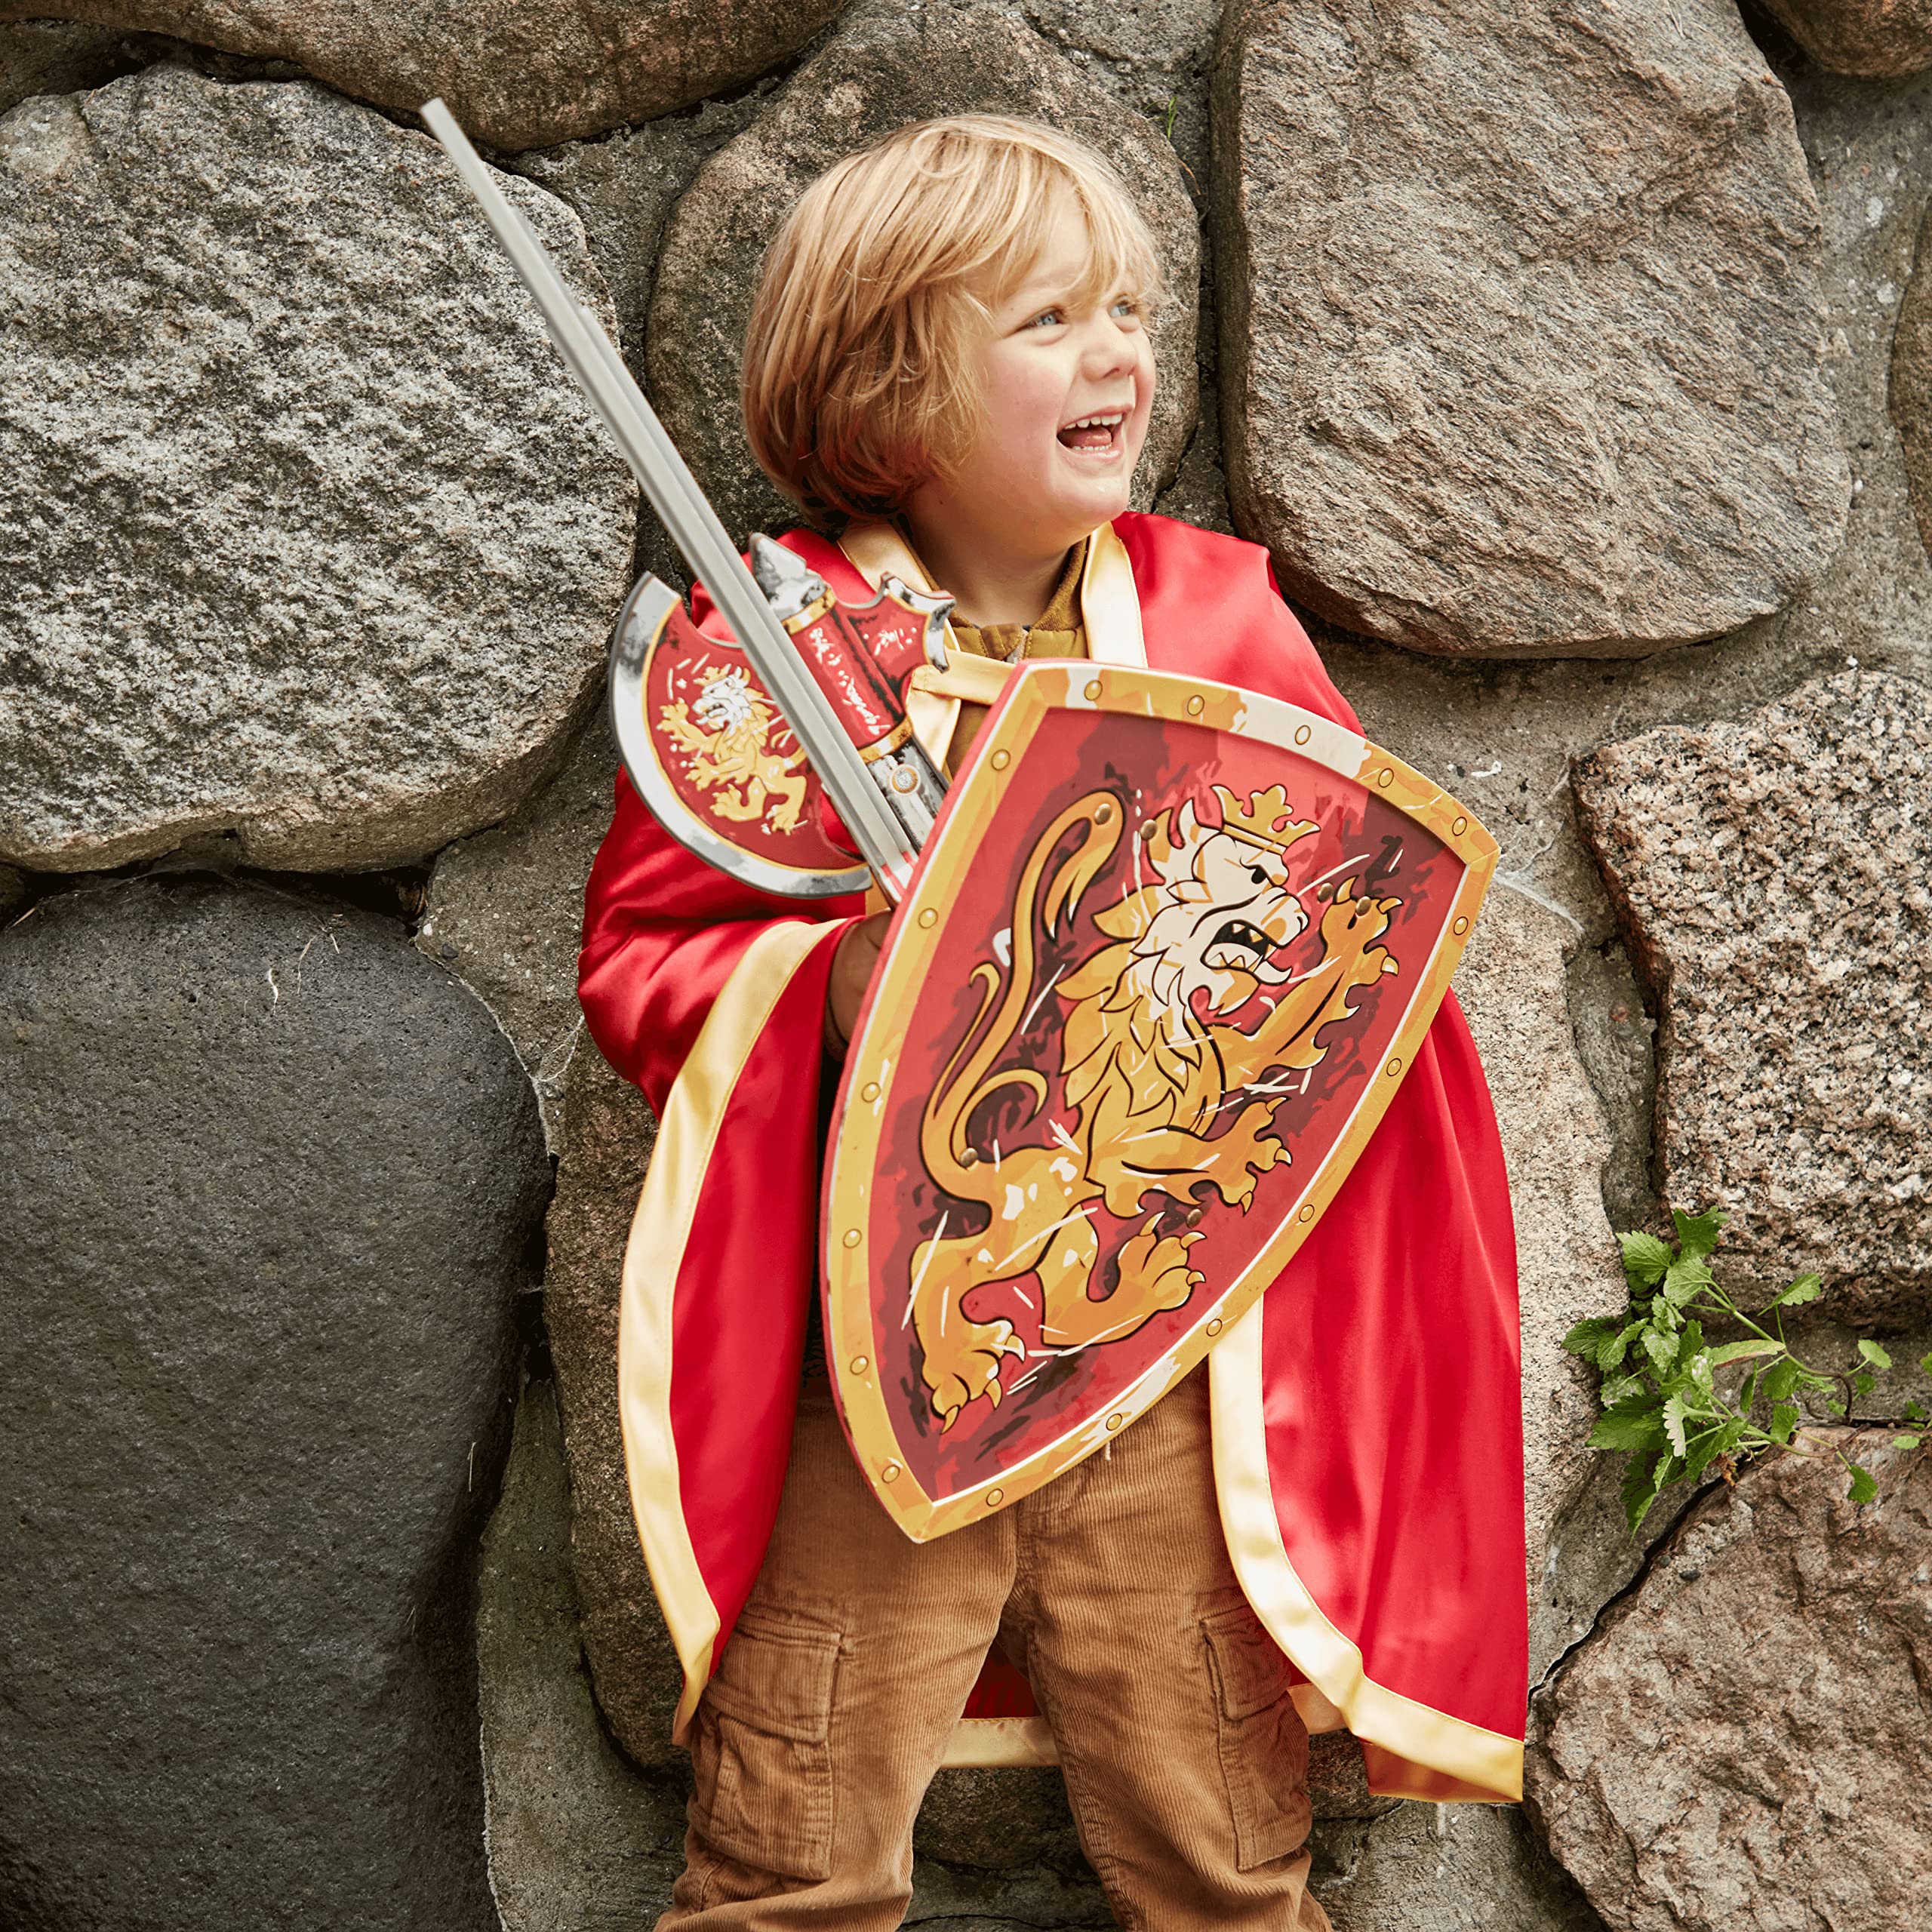 Liontouch Noble Knight Sword, Red | Medieval Pretend Play Foam Toy for Children with Golden Lion Theme | Safe Weapons & Battle Armor for Kid’s Dress Up & Costumes